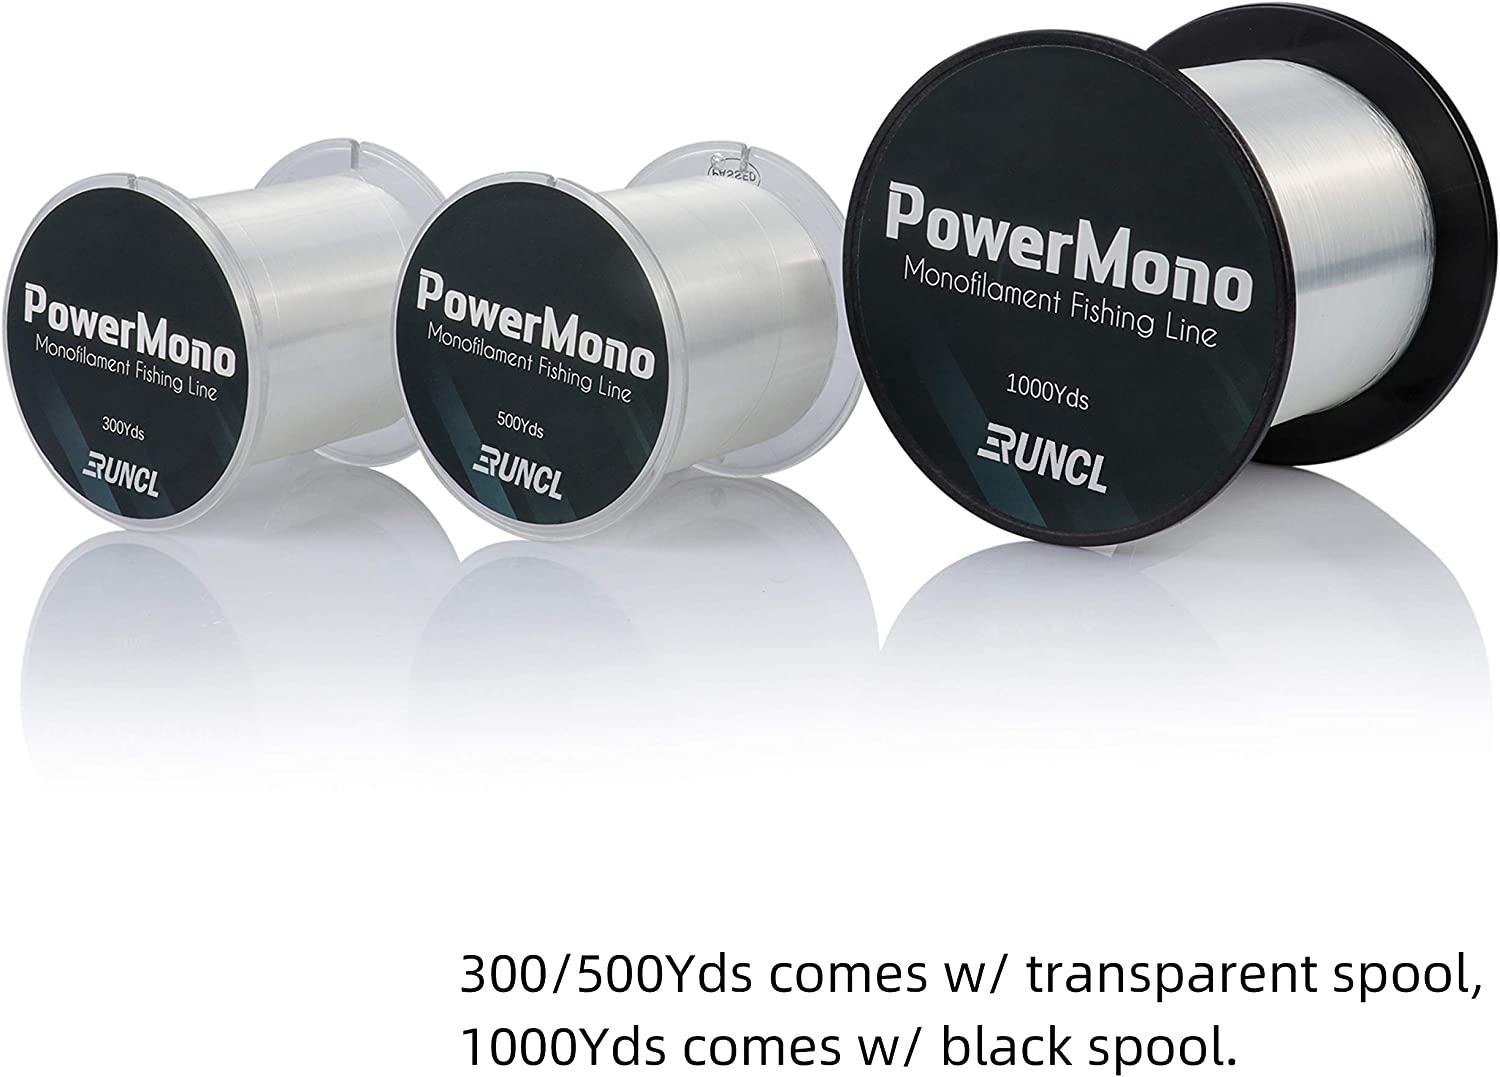 RUNCL PowerMono Fishing Line, Monofilament Fishing Line 300/500/1000Yds -  Ultimate Strength, Shock Absorber, Suspend in Water, Knot Friendly - Mono  Fishing Line 3-35LB, Low- & High-Vis Available A - Clear 6LB(2.7kgs)/0.20m